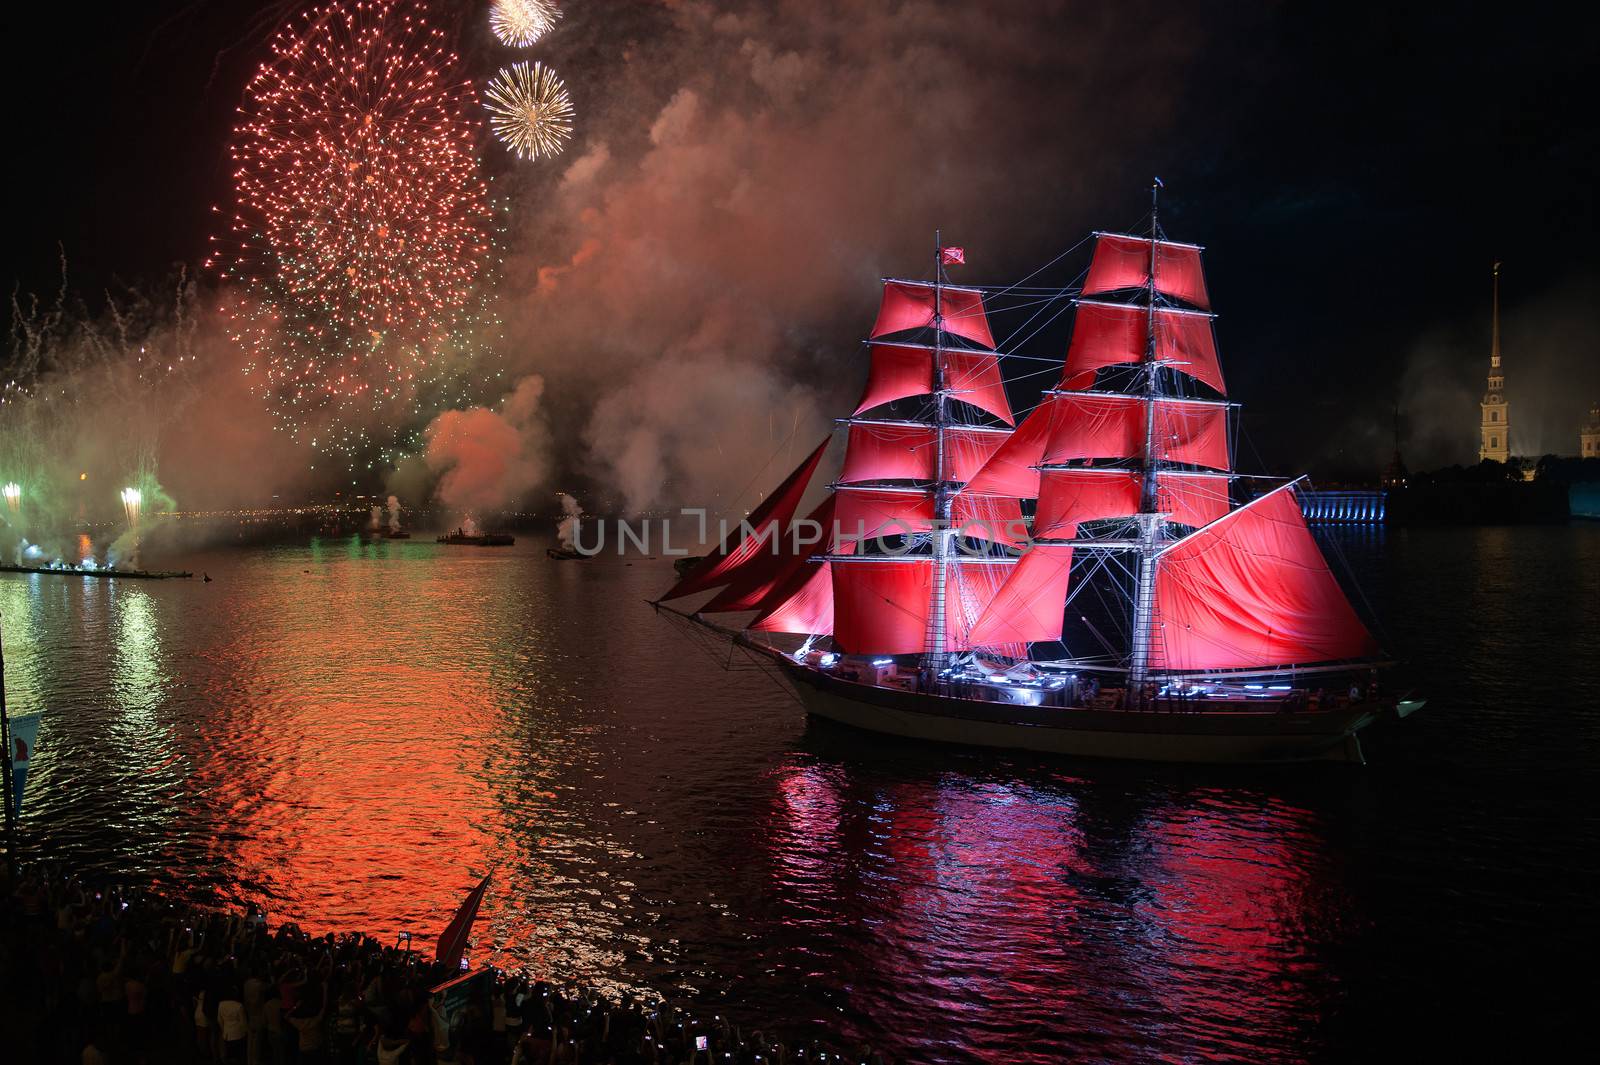 ST.PETERSBURG, RUSSIA - JUNE 24: Celebration Scarlet Sails show during the White Nights Festival, June 24, 2013, St. Petersburg, Russia. 